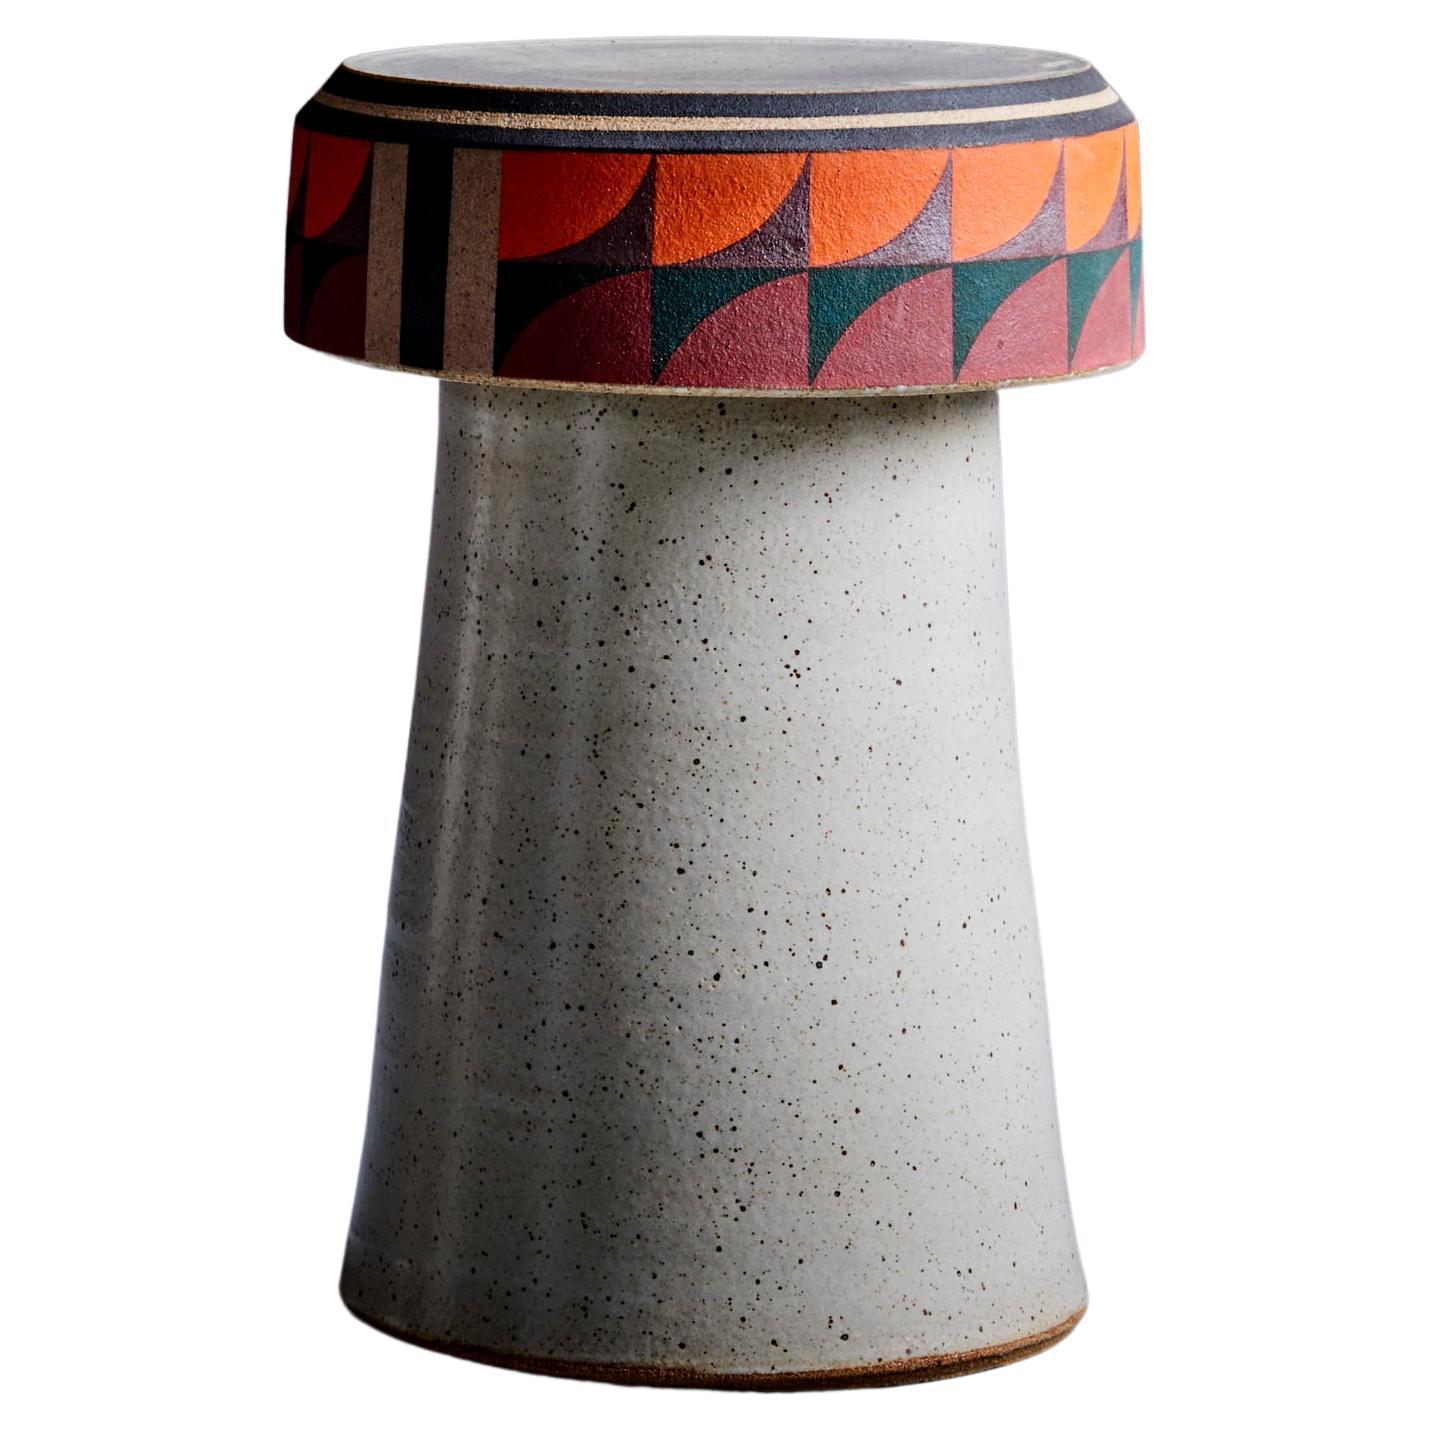 Kat and Roger hand-painted Studio ceramic stool, USA - new  For Sale